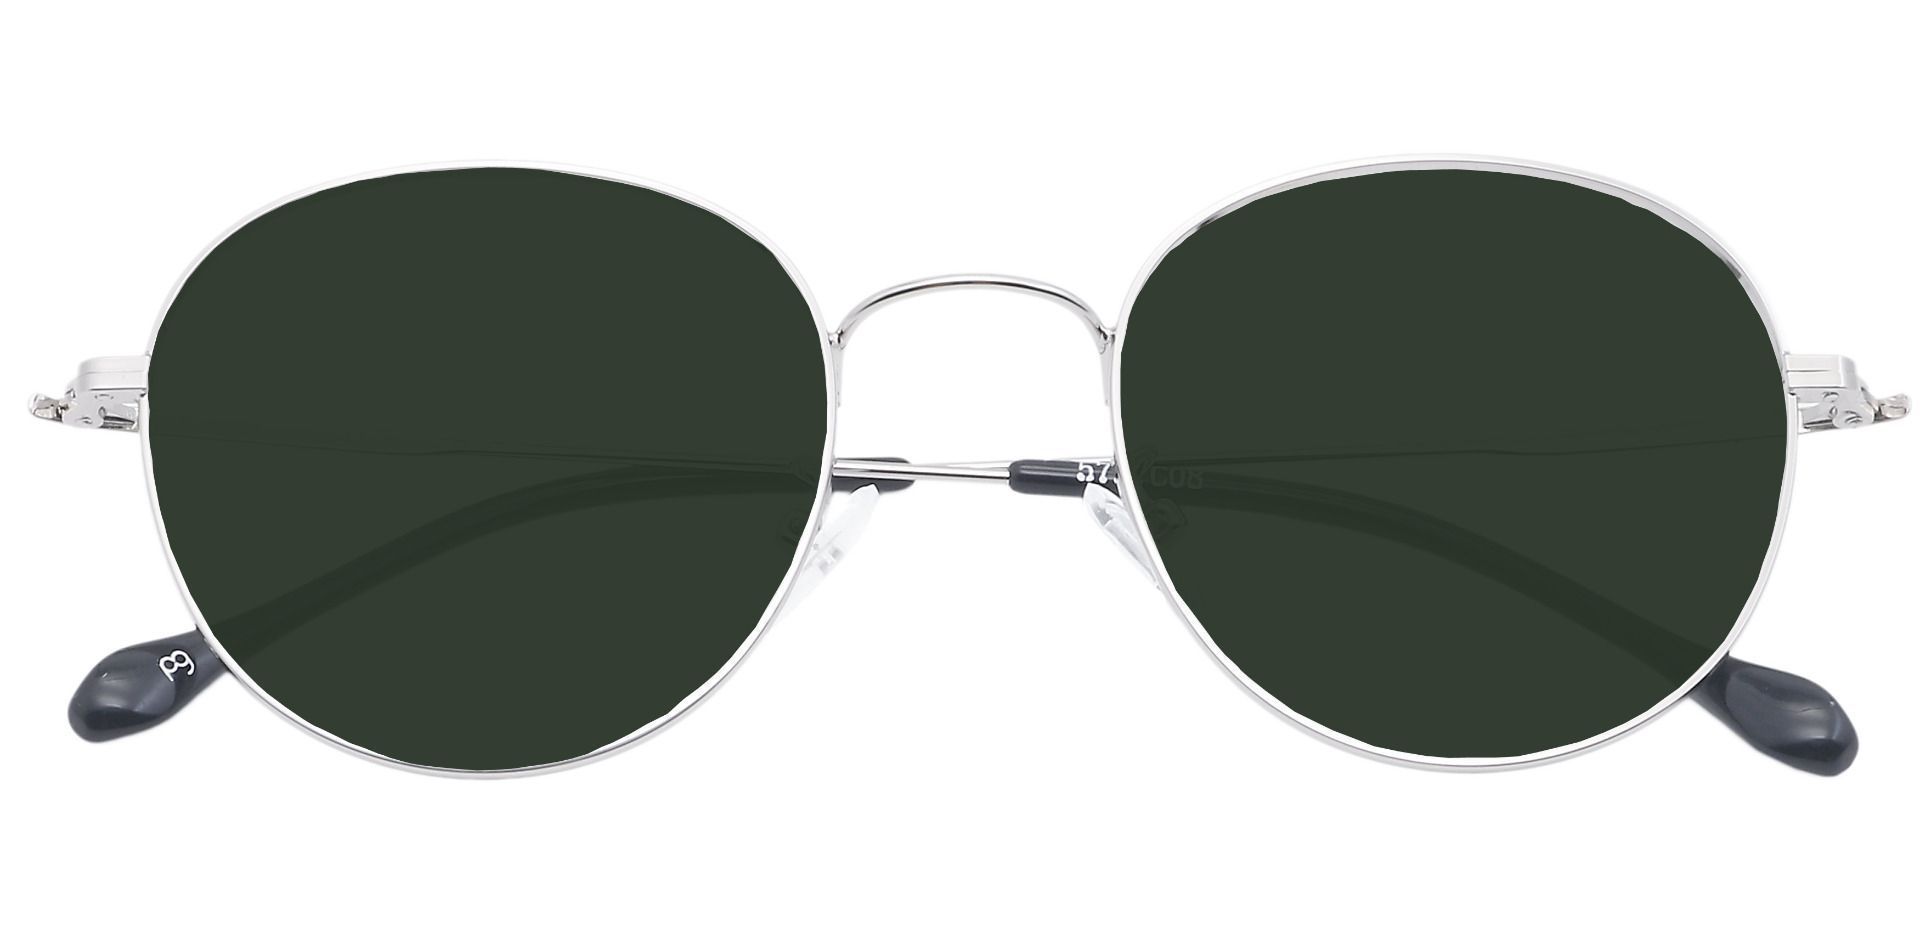 Miller Oval Lined Bifocal Sunglasses - Gray Frame With Green Lenses